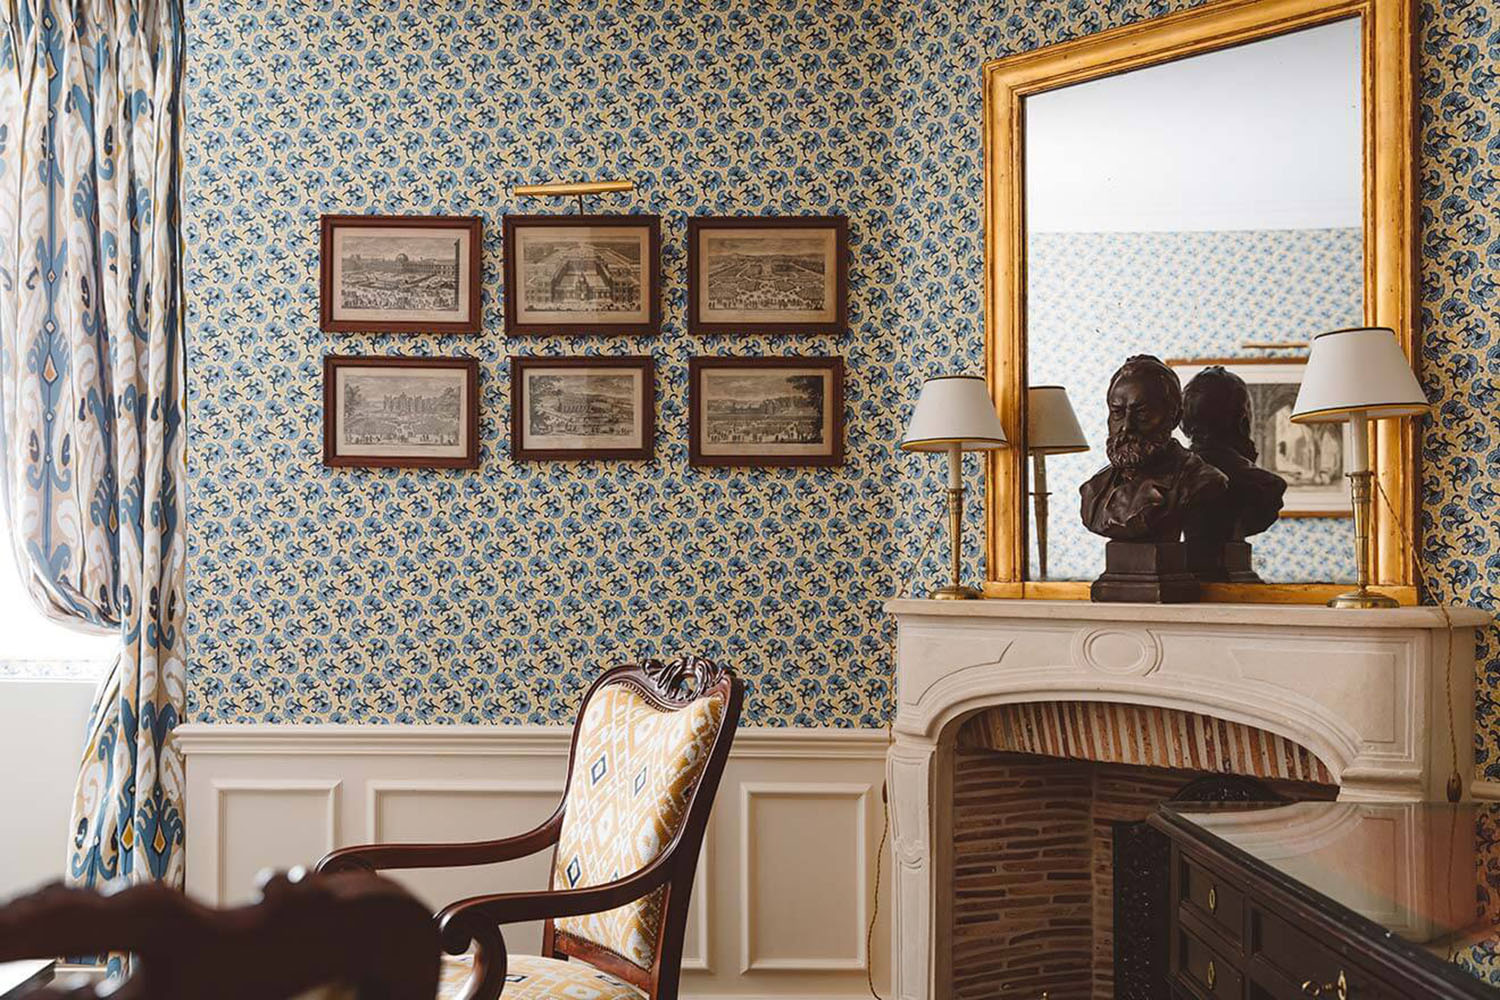 A blue floral wallpapered guest room at Hôtel de l'Abbaye with a vintage mahogany armchair and working wood fireplace